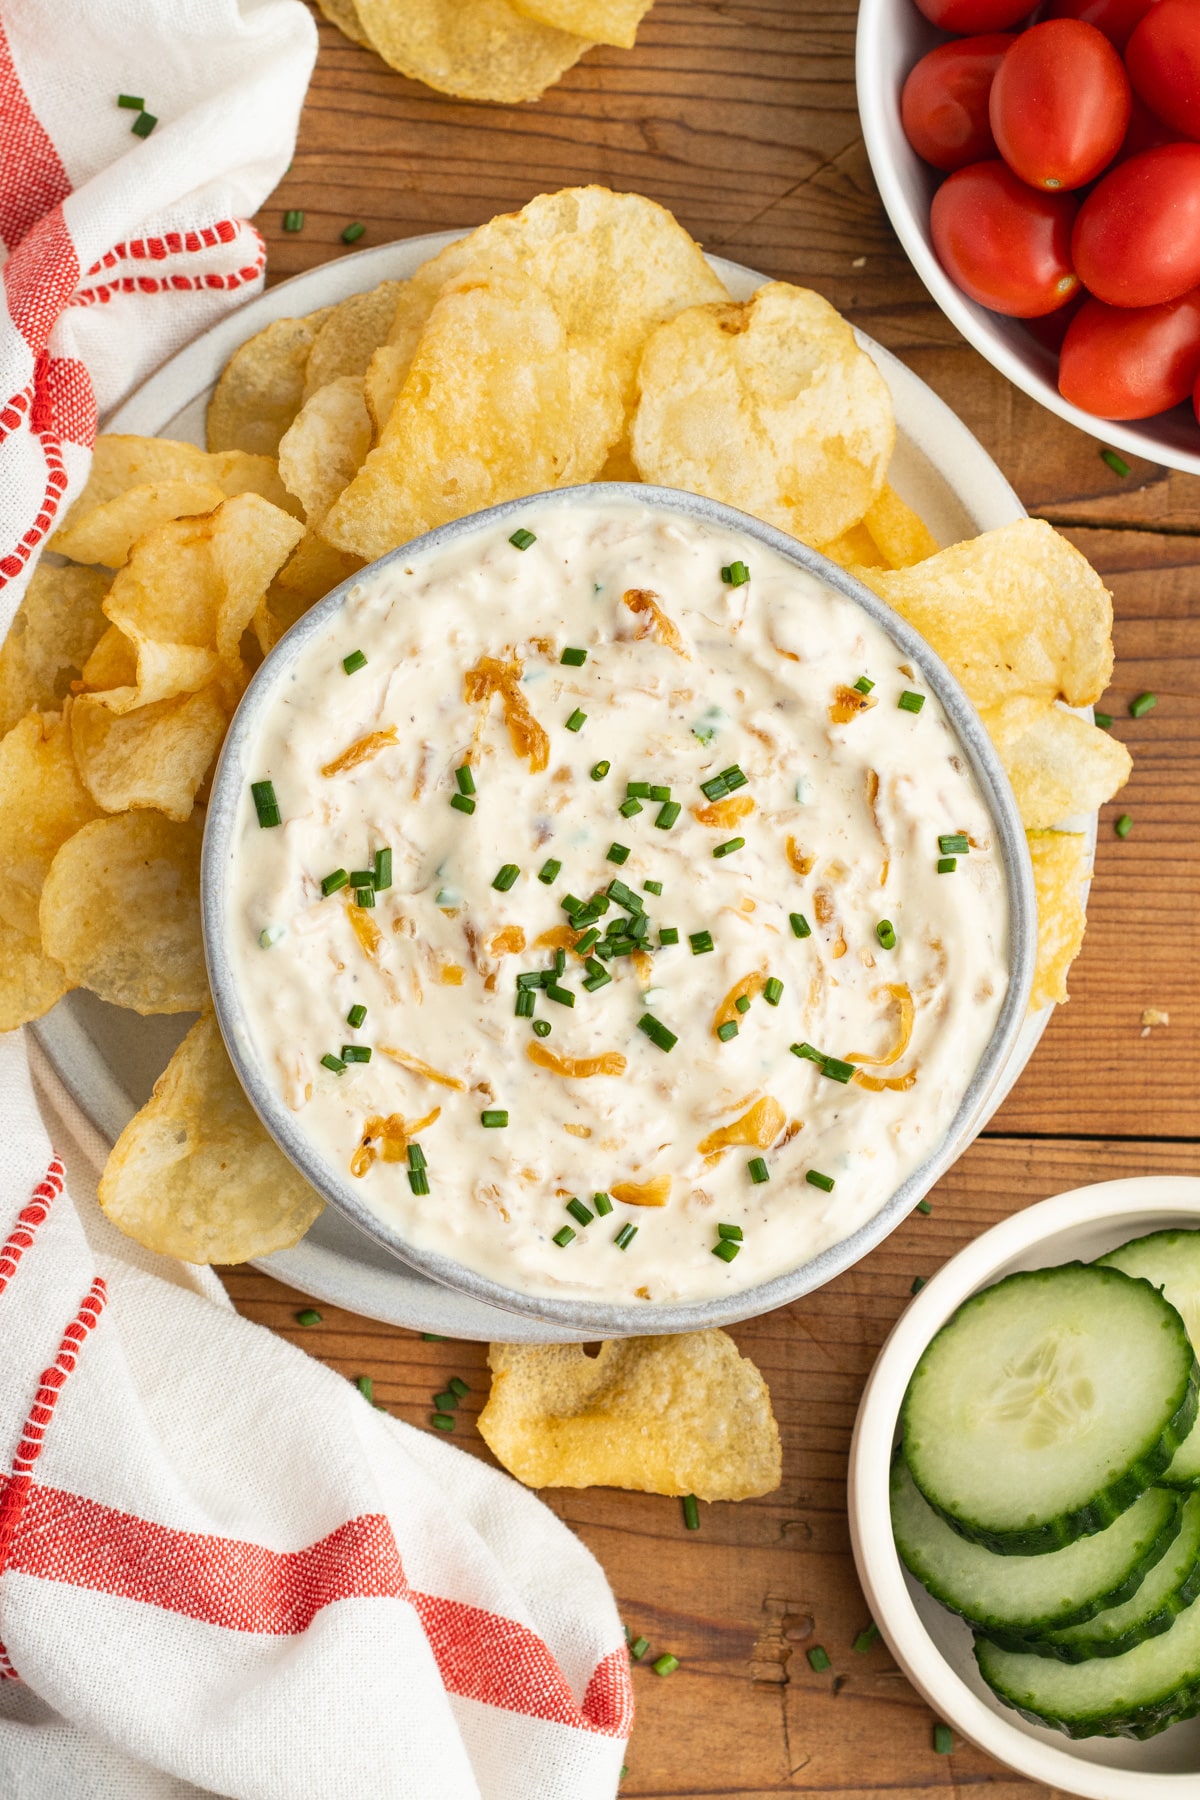 This is a picture of a bowl with the onion dip, chips, tomatoes and cucumber.